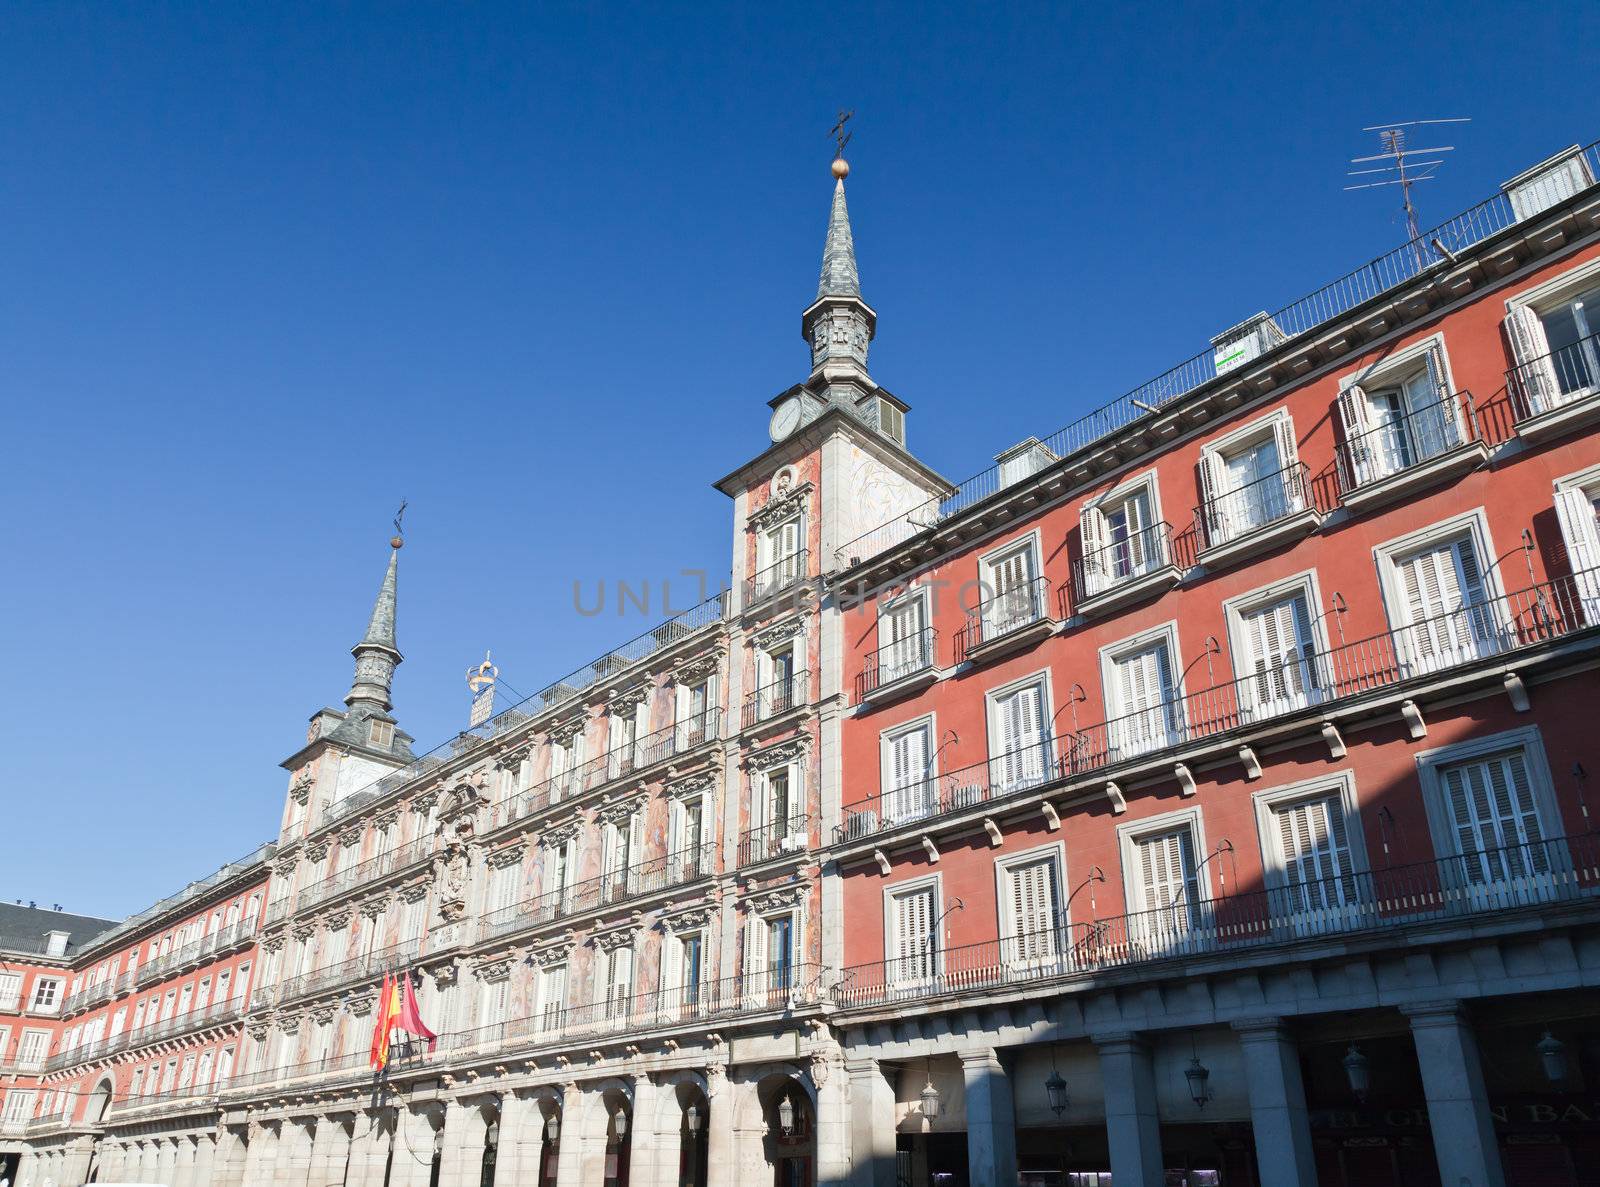 The Plaza Mayor (Main Square) in Madrid by gary718